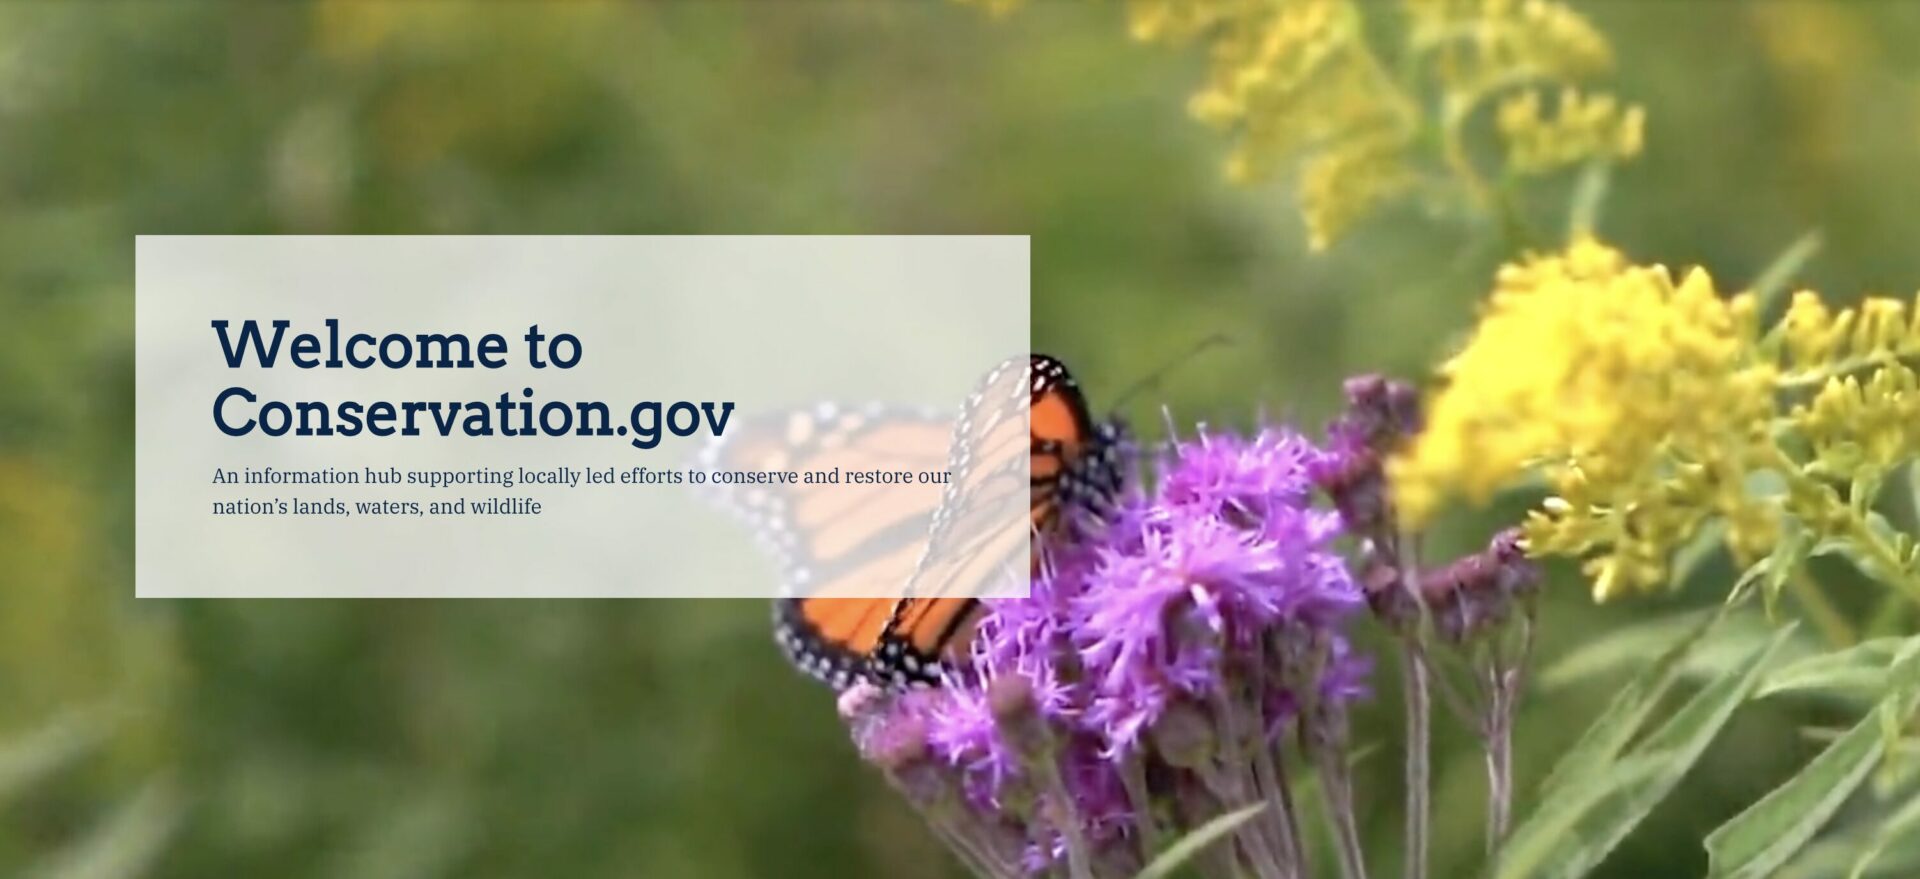 Home Page of the new Conservation.gov website